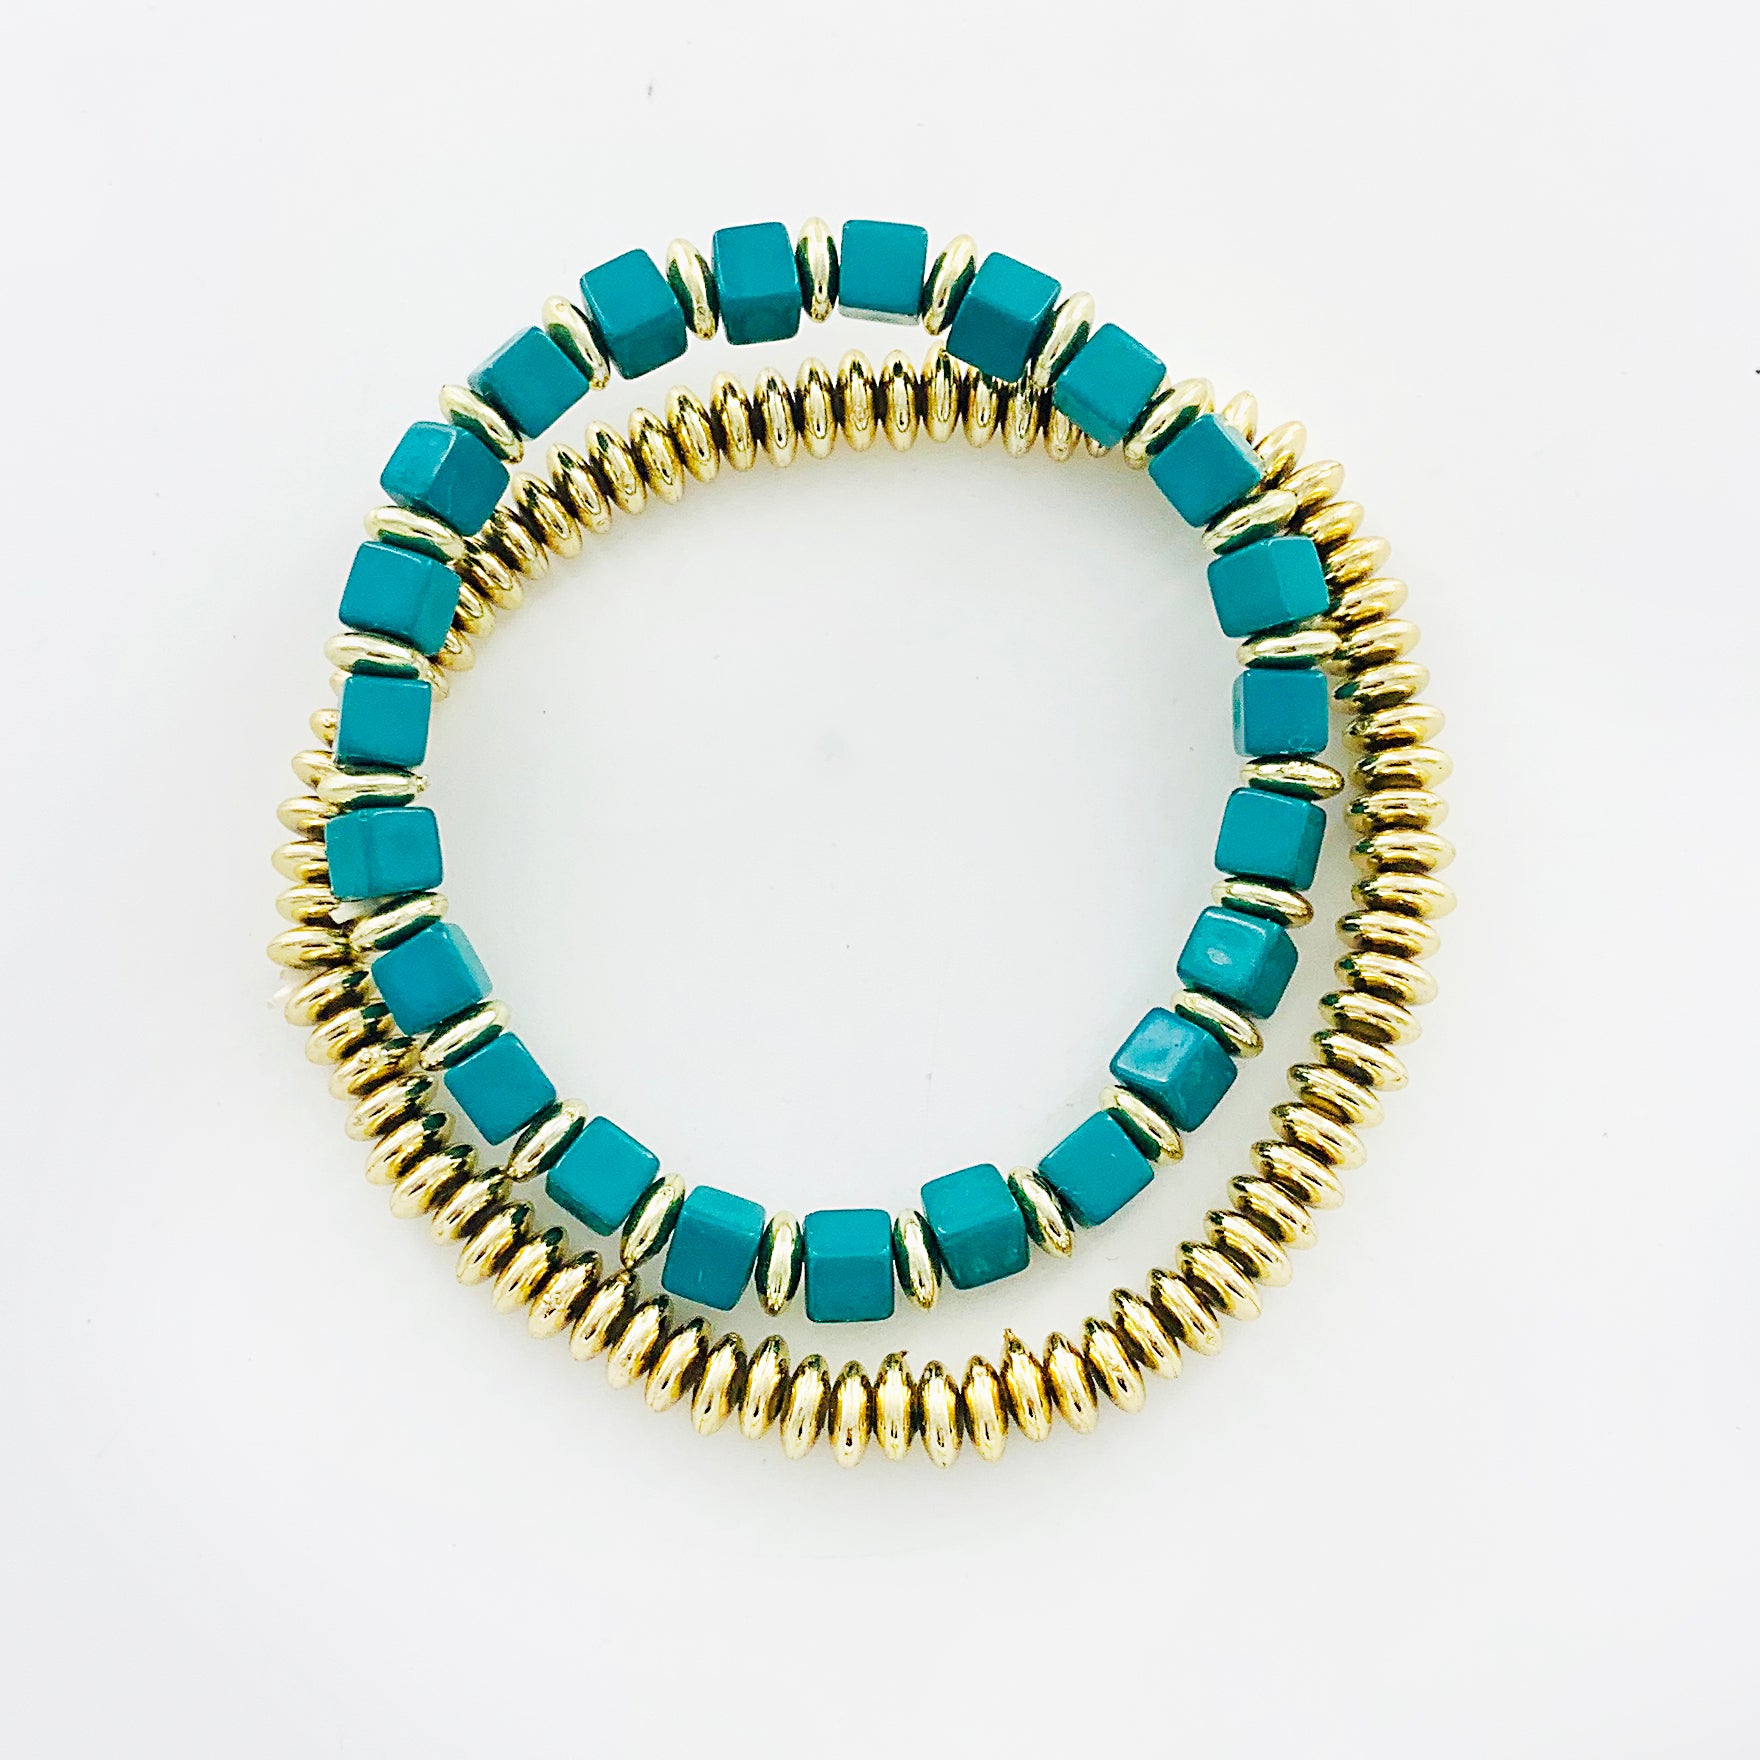 Teal and gold beaded double bracelets